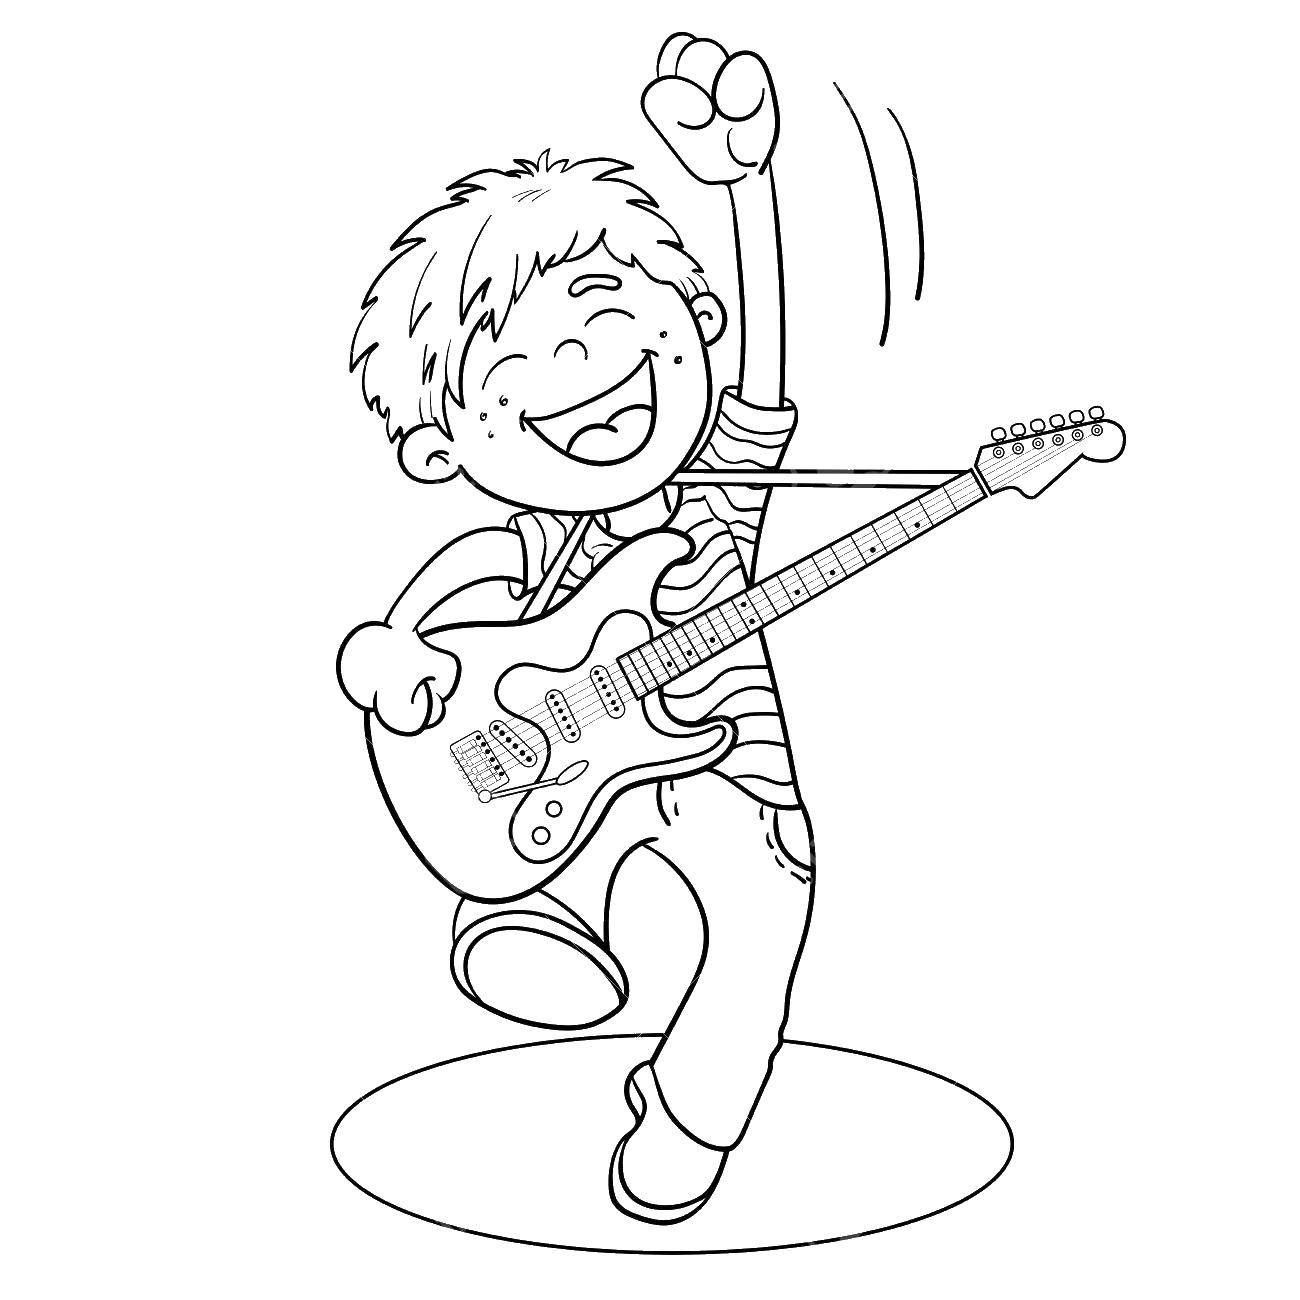 Coloring The boy with the guitar. Category the contour of the boy. Tags:  boy, guitar.